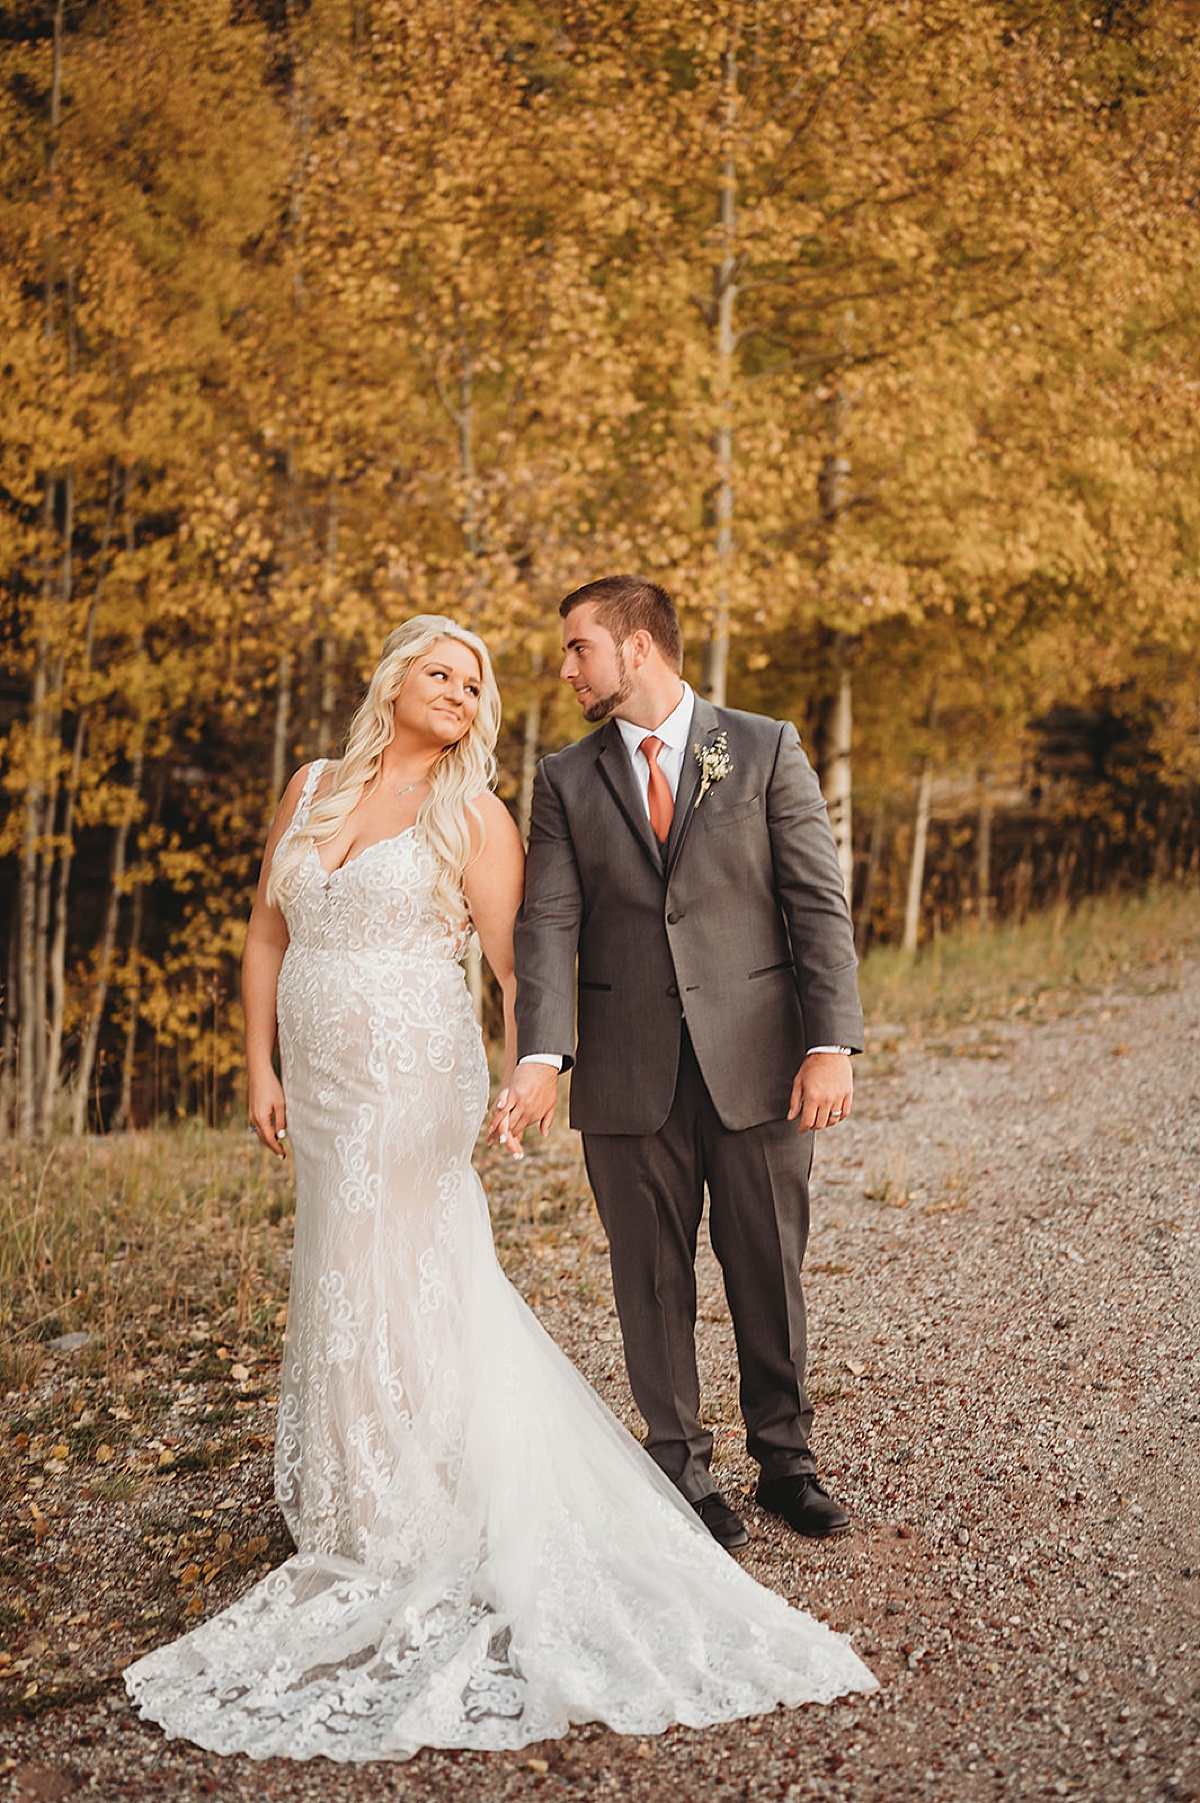 Bride in lace embellished gown and groom in gray suit pose in front of yellow autumn trees shot by palo duro canyon elopement photographer